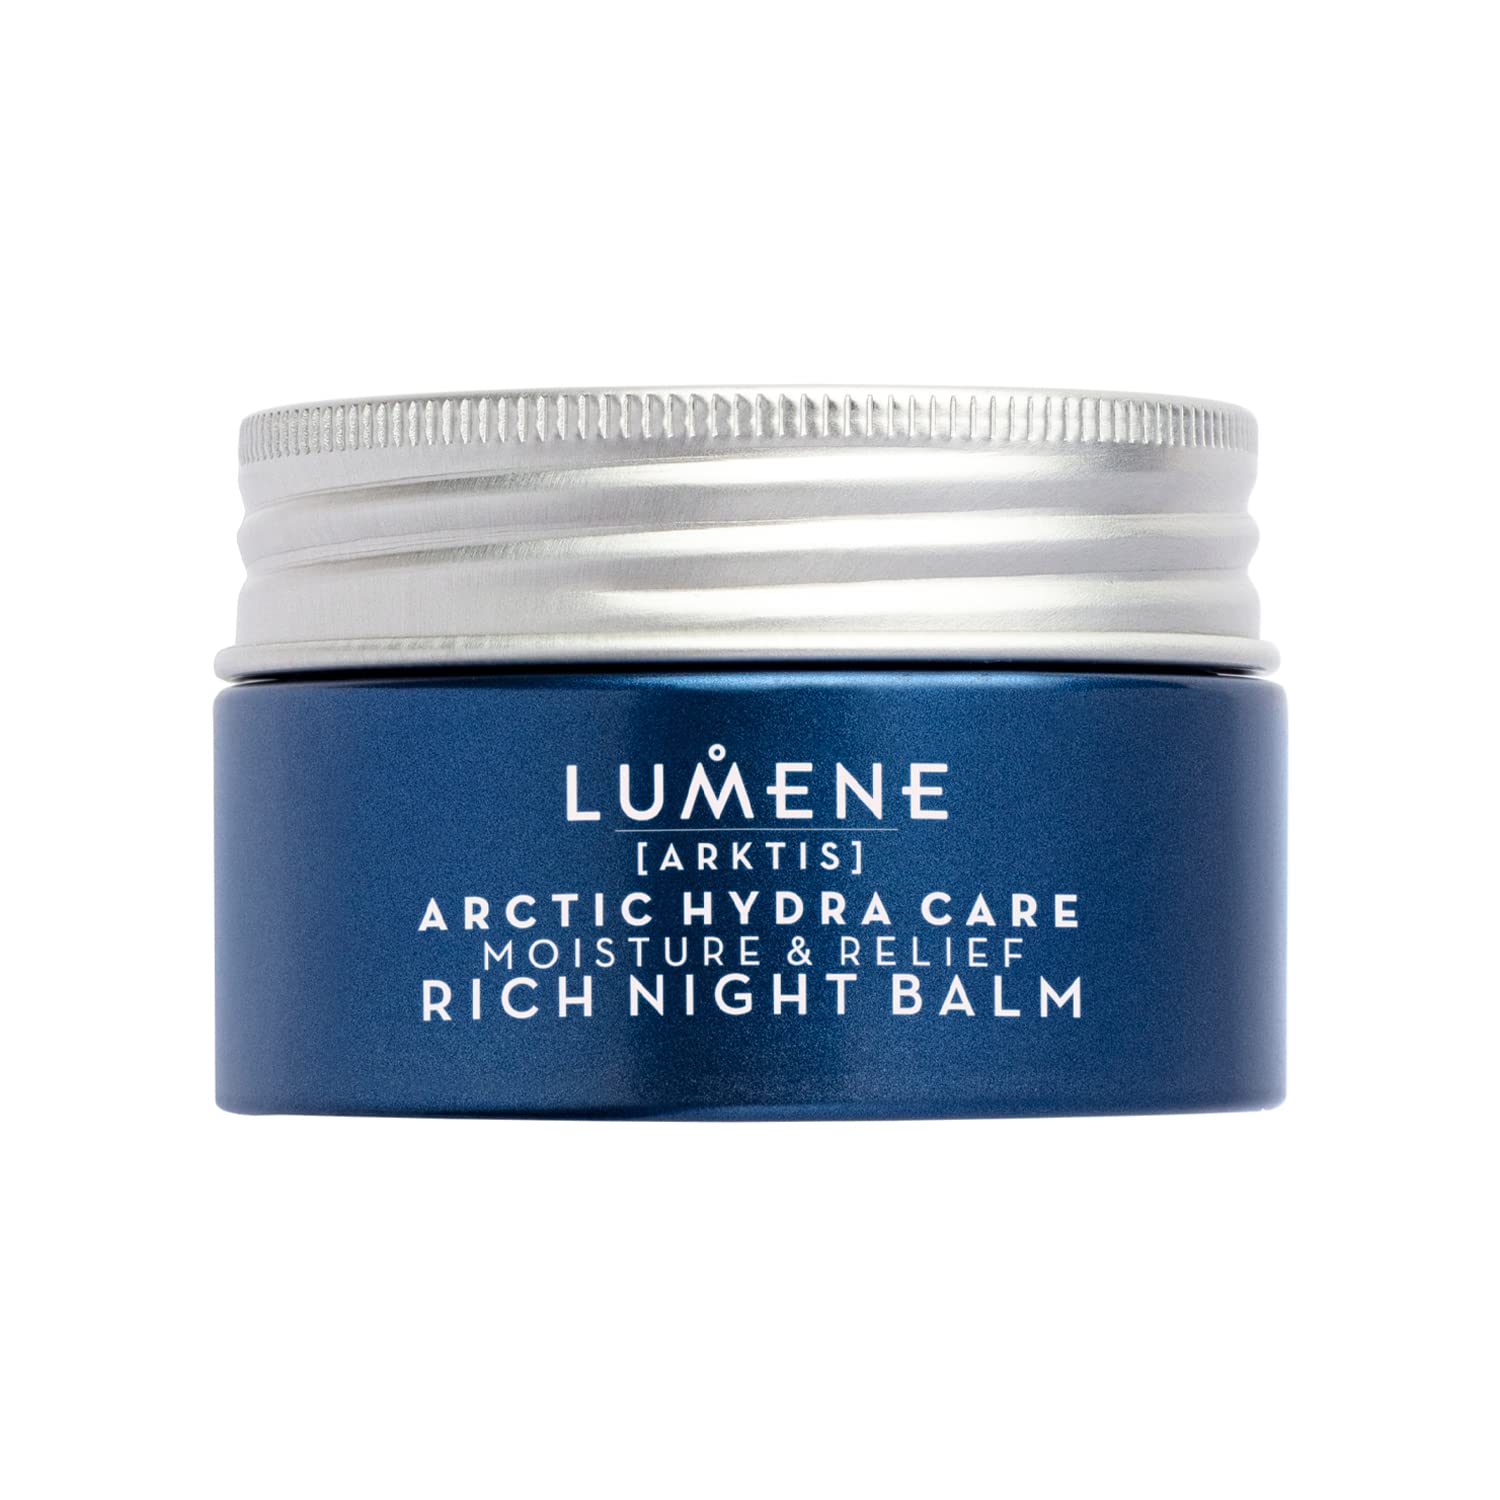 Lumene Arctic Hydra Care Moisture Relief Rich Night Balm - Face Balm Moisturizer for Dry Skin - Night Cream Hydrating Rescue Balm with Nordic Oat Butter, Bilberry, Oat Oils + Ceramides (50)